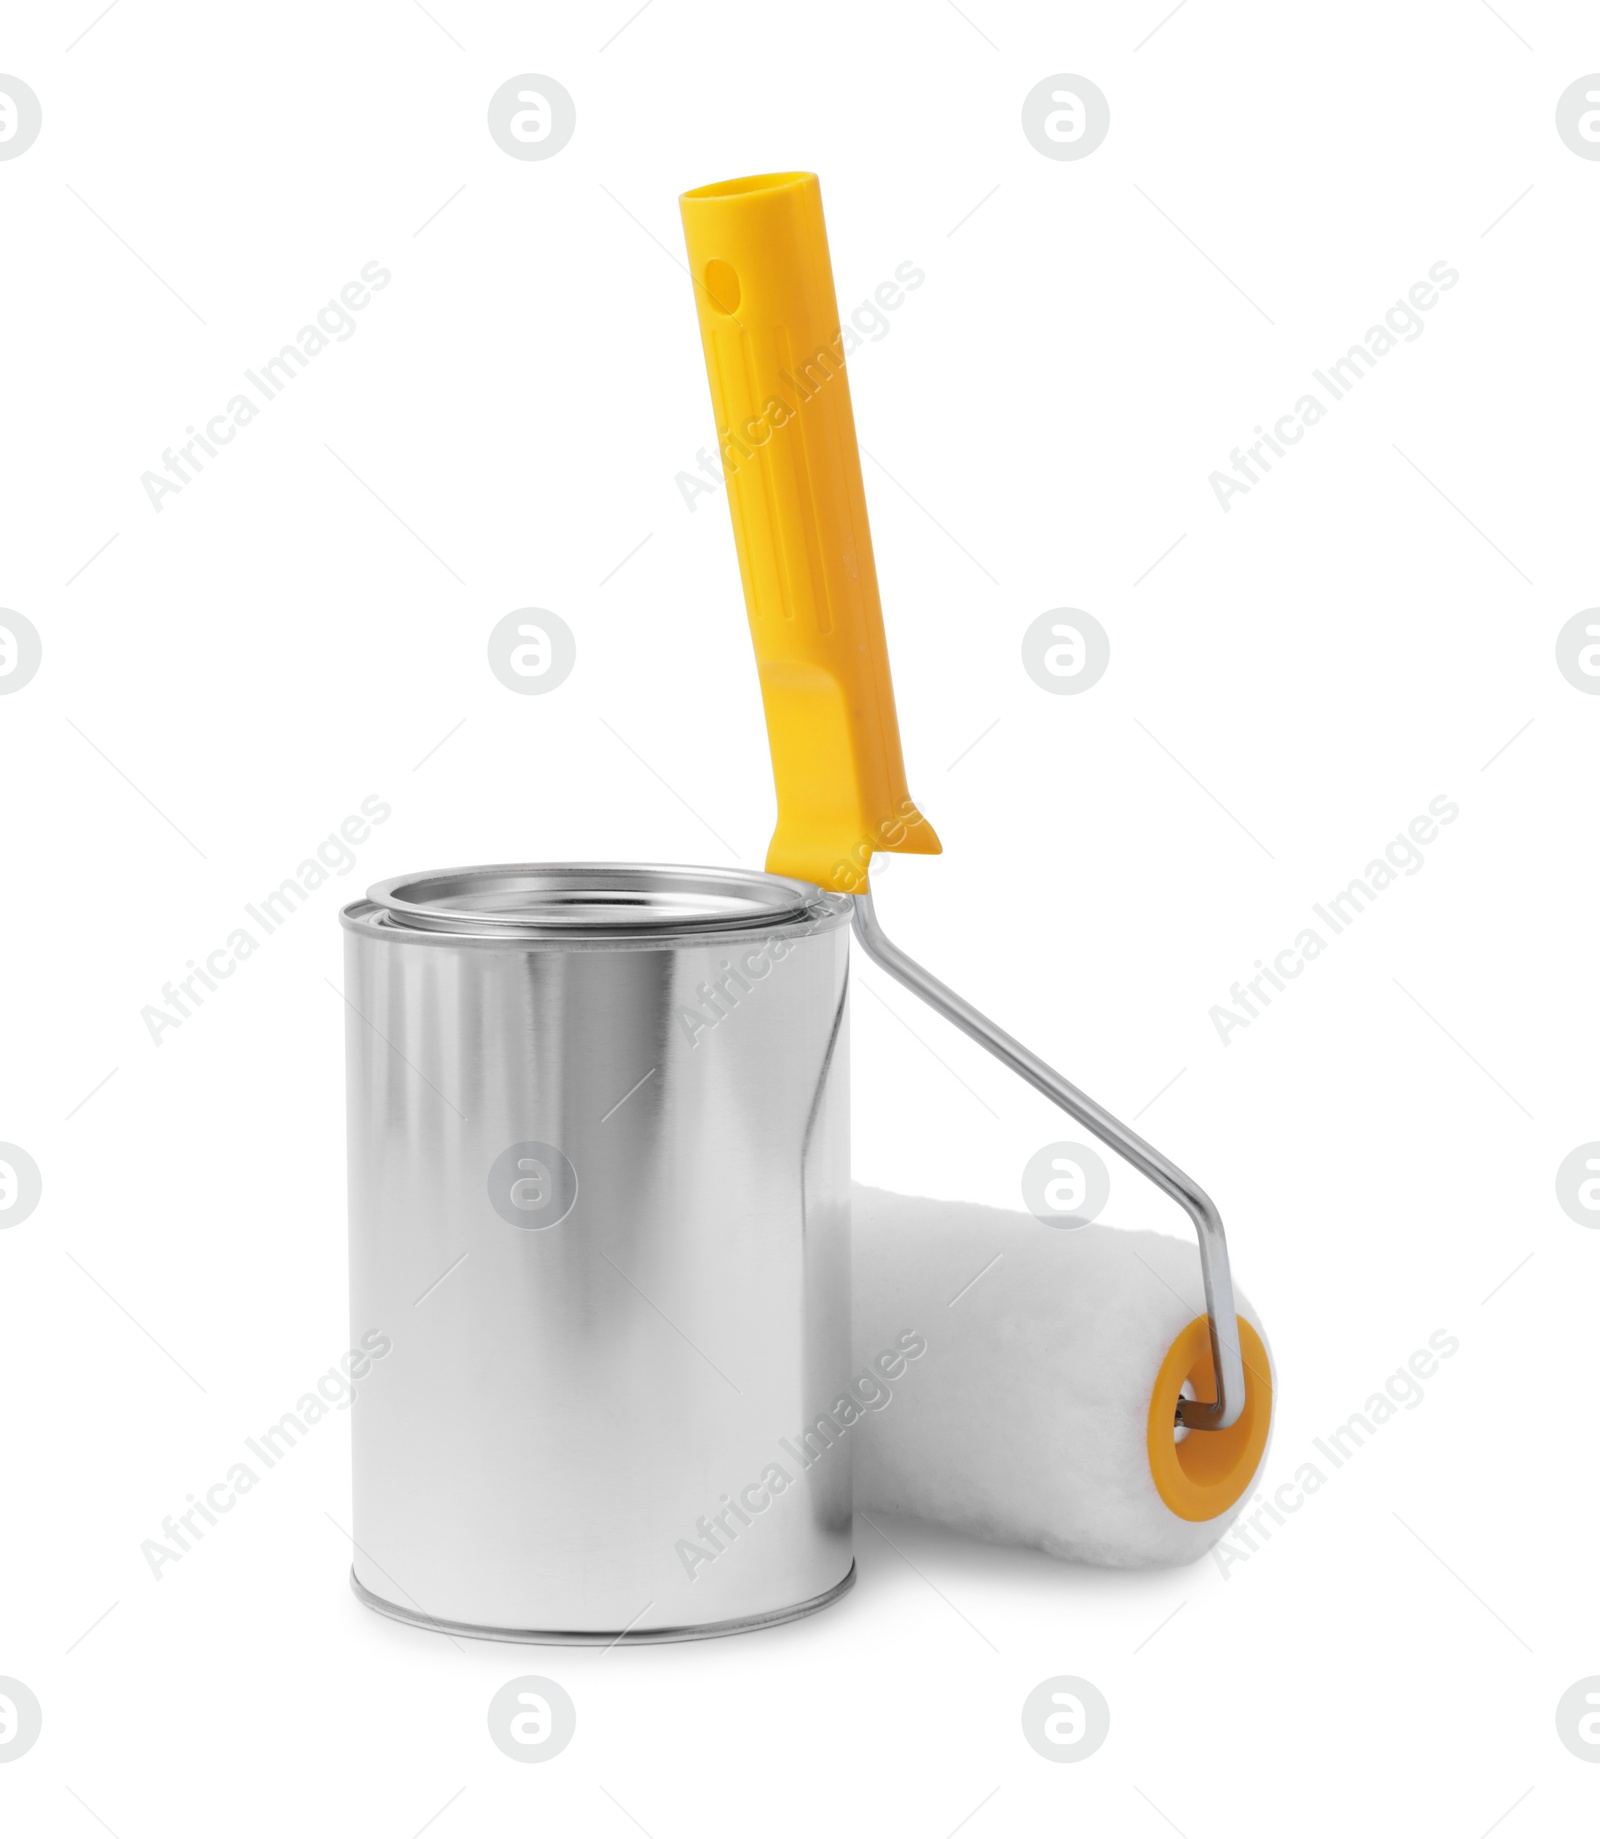 Photo of Can of paint and roller on white background